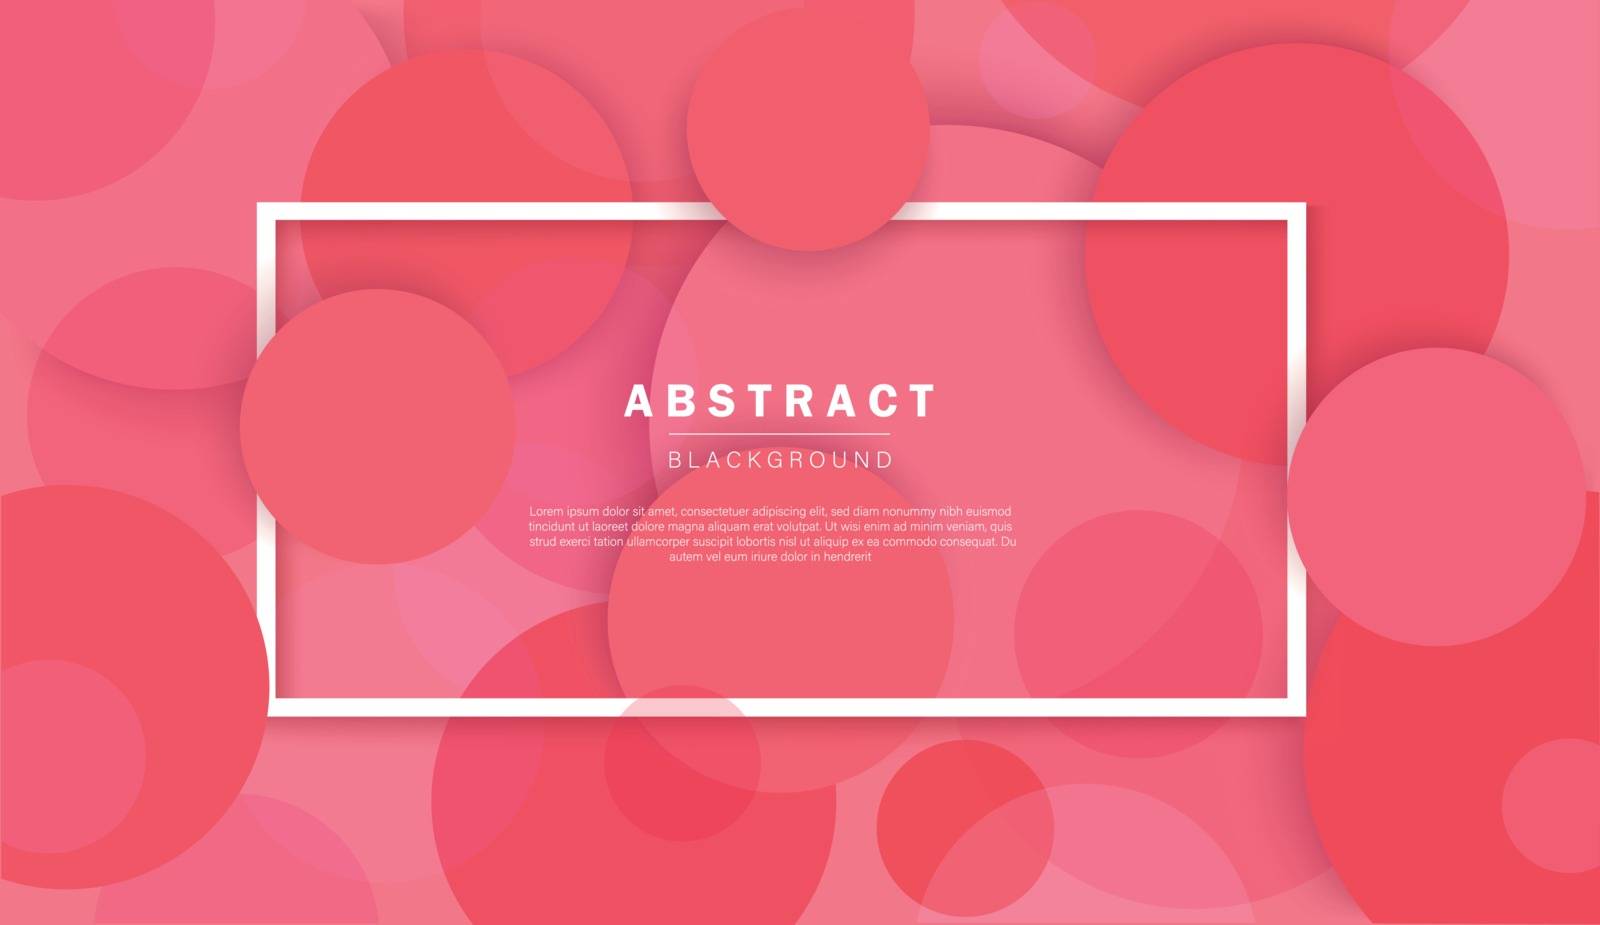 Abstract pink circle background vector illustration by h-santima